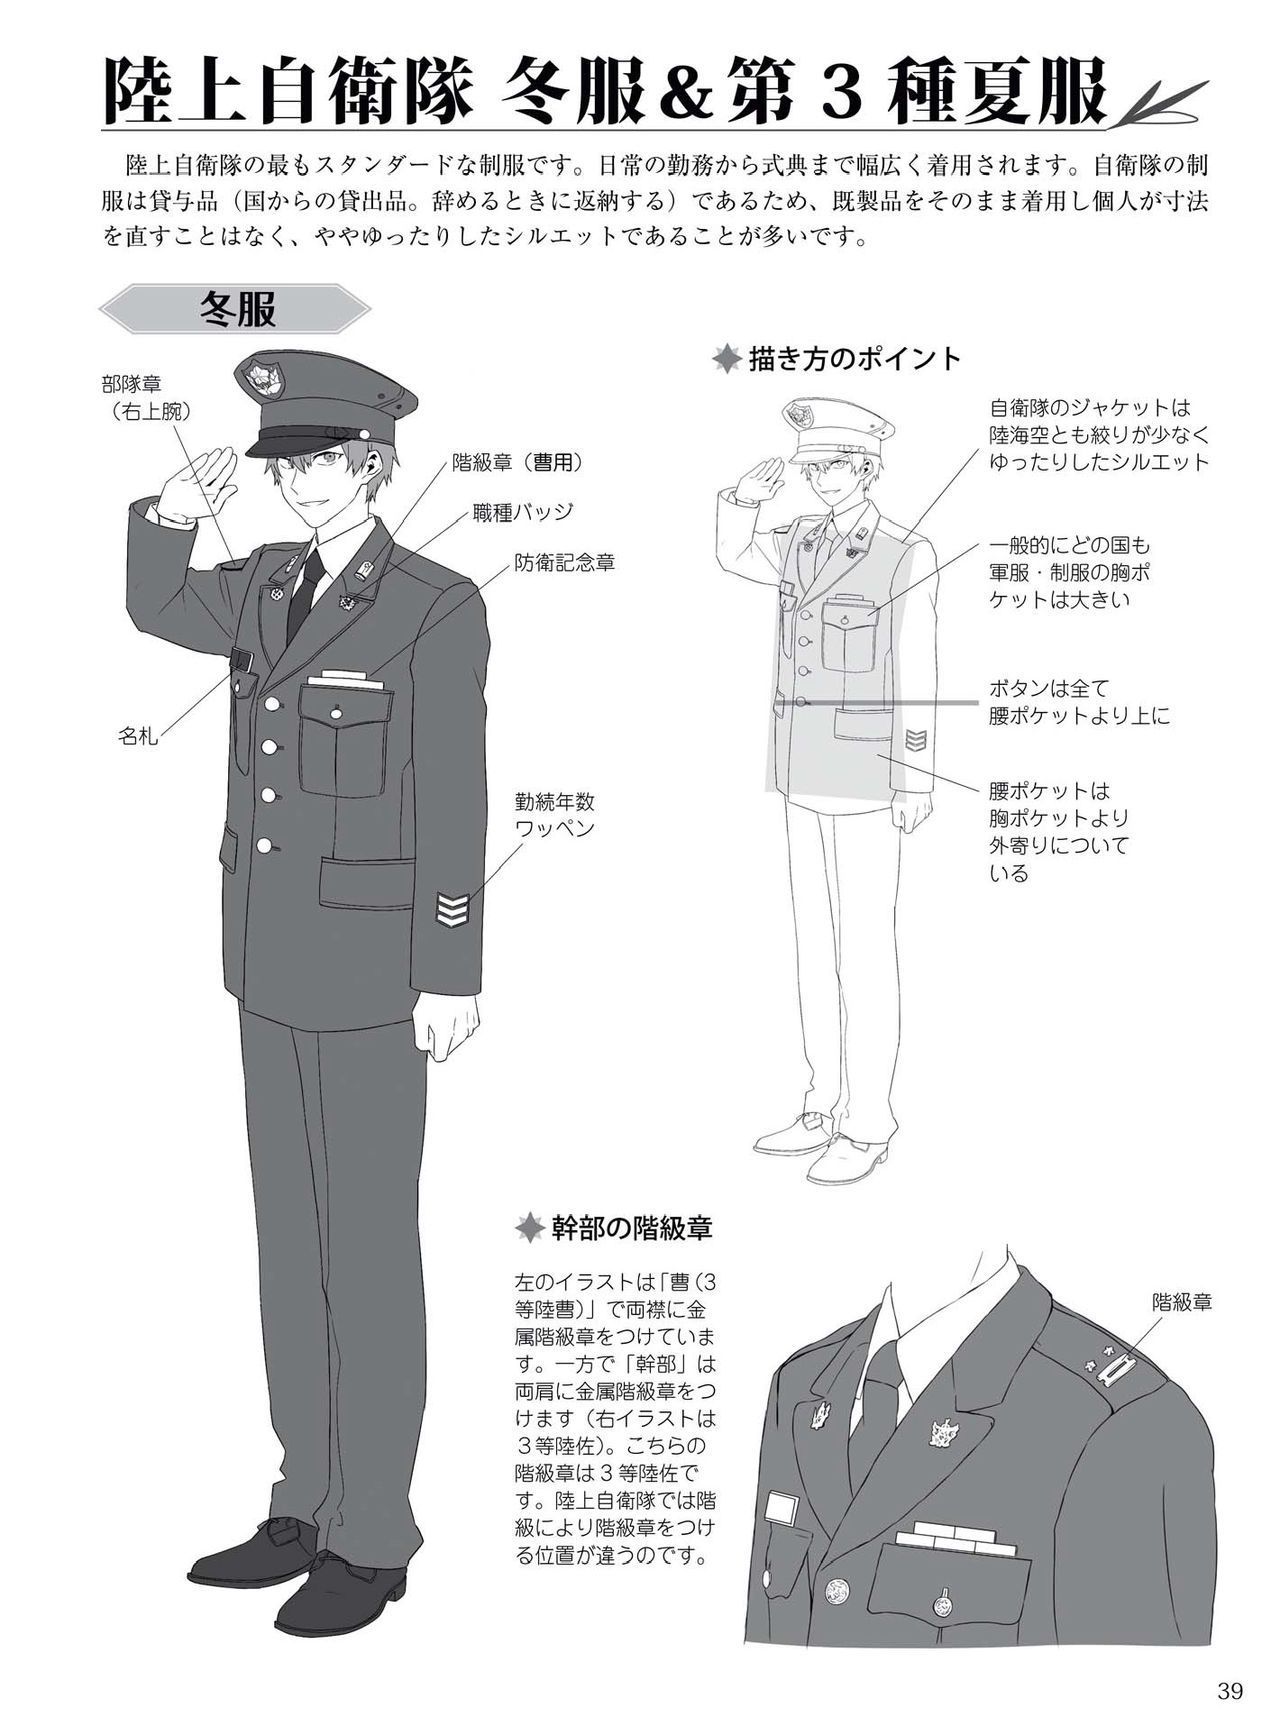 How to draw military uniforms and uniforms From Self-Defense Forces 軍服・制服の描き方 アメリカ軍・自衛隊の制服から戦闘服まで 42